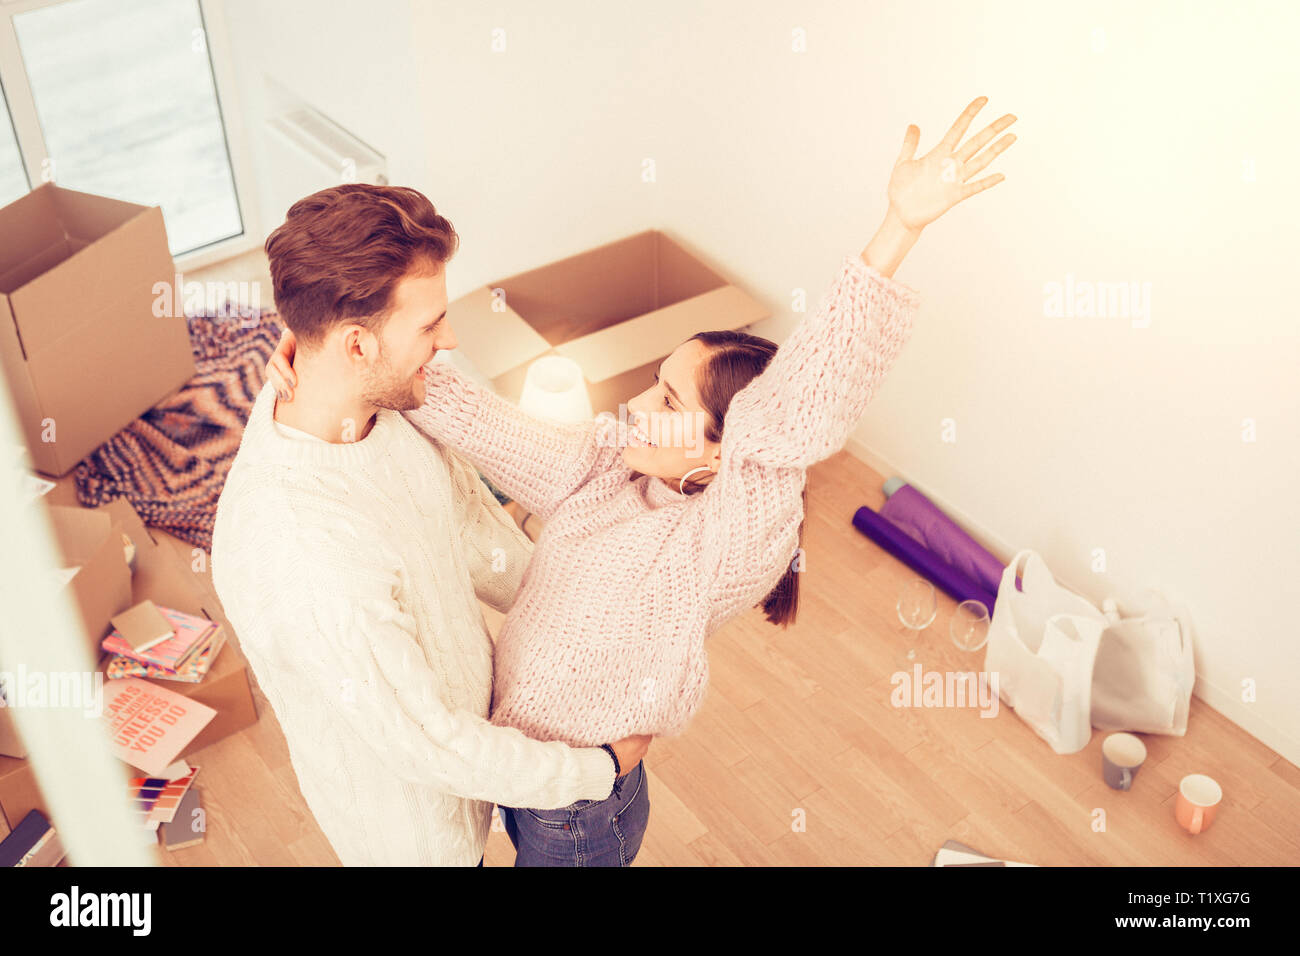 Loving husband hugging his wife standing in room with boxes Stock Photo